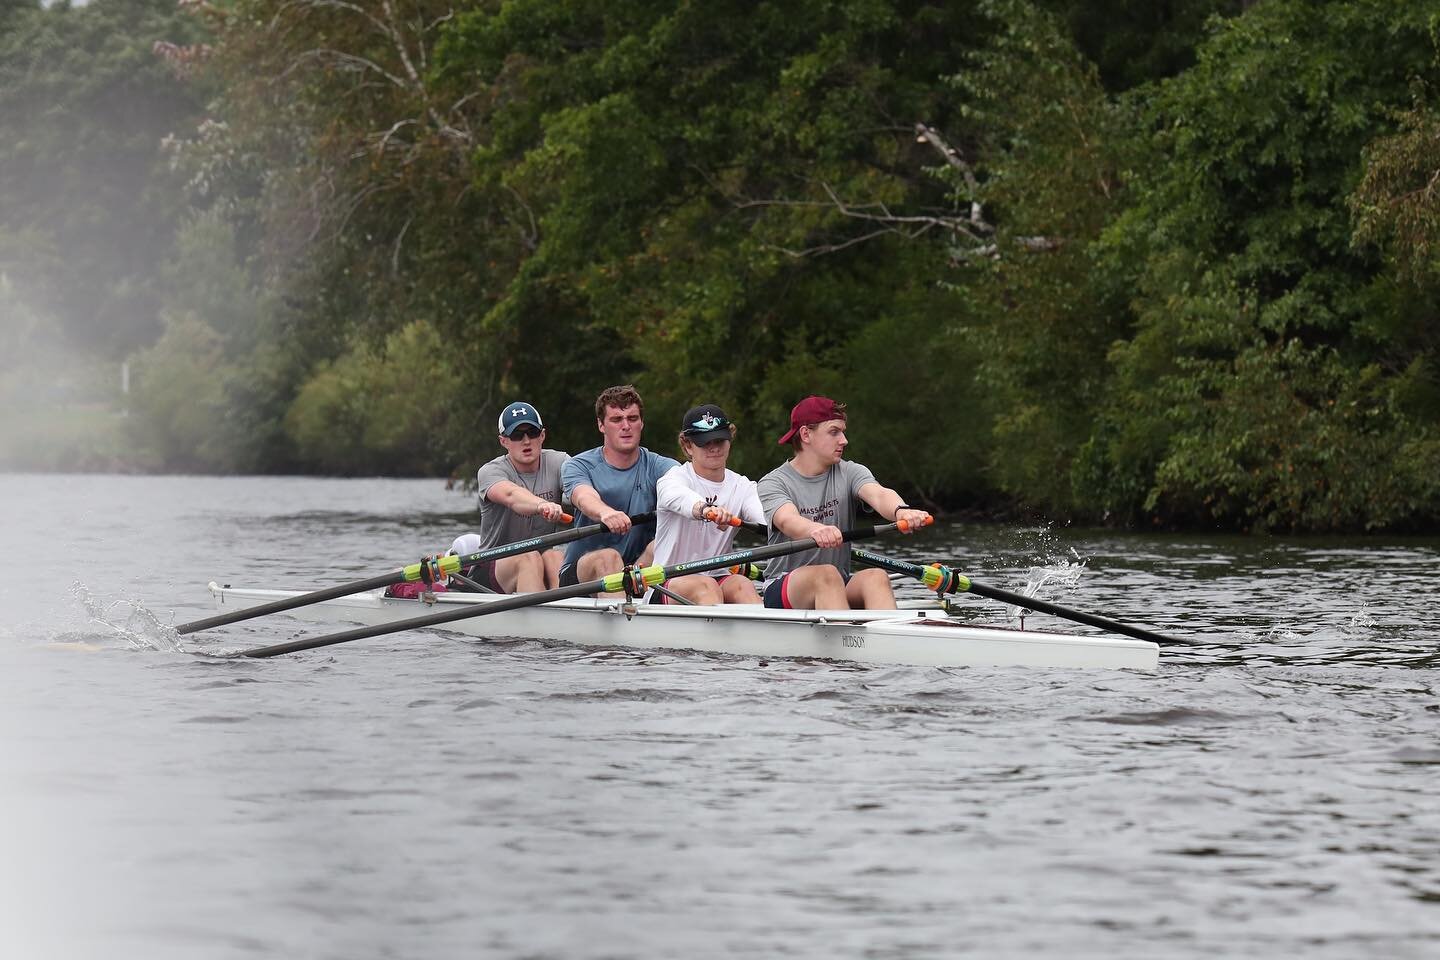 This weekend, several members of the team travelled to Boston to train on the course of The Head of the Charles happening in just a few weeks. The first head race of the fall season happens in less than two weeks, go Aggies!

📸: @shi_man_91 
#umass 